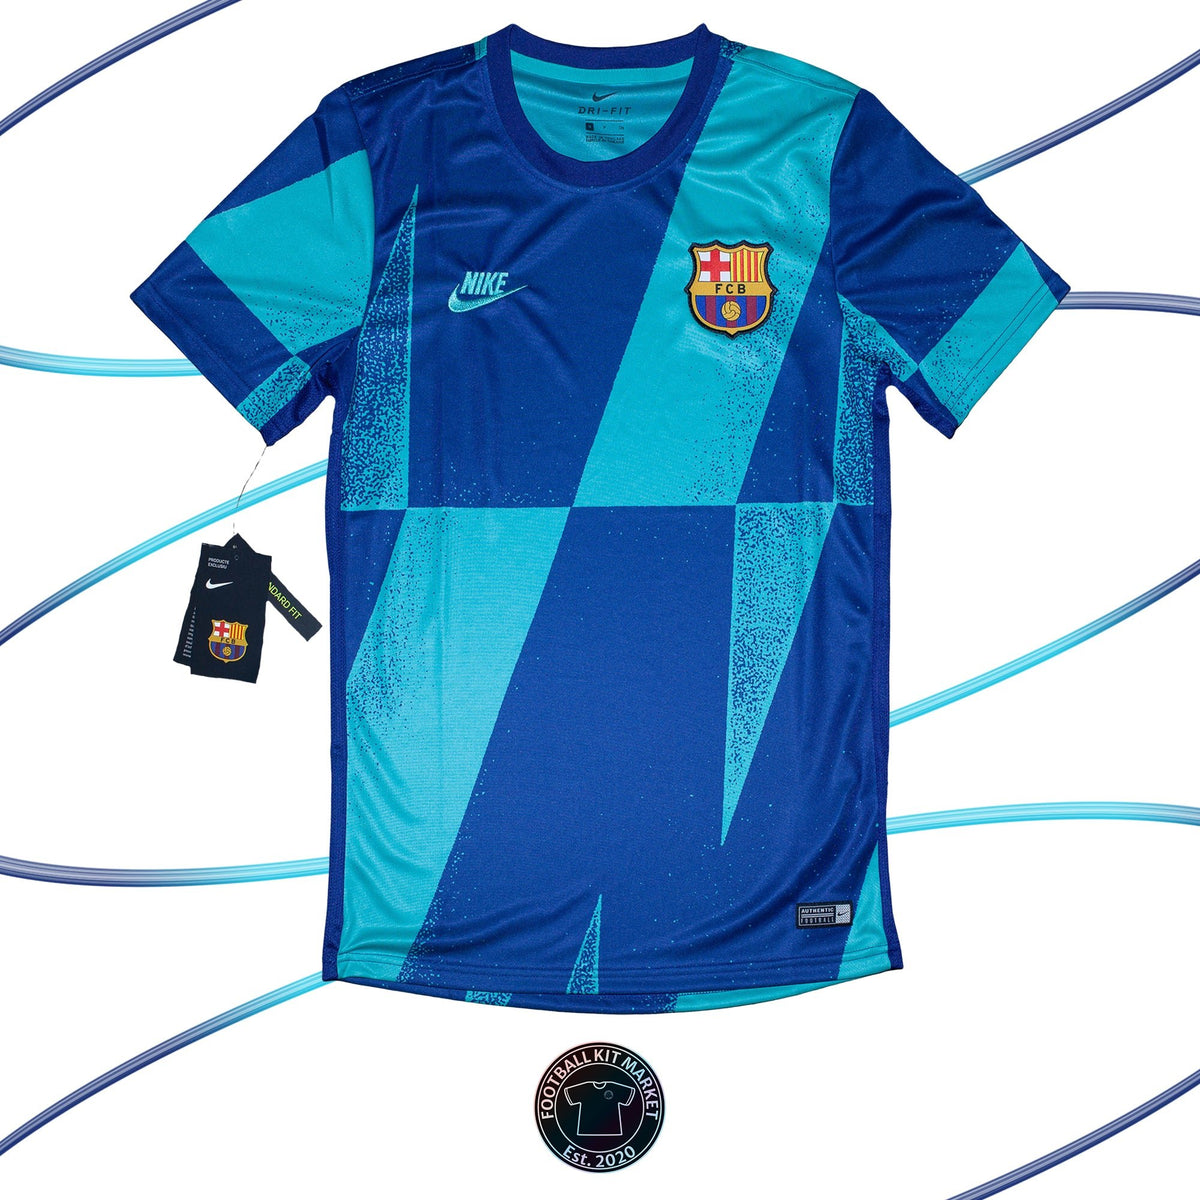 Genuine BARCELONA Pre-Match (2019-2020) - NIKE (S) - Product Image from Football Kit Market